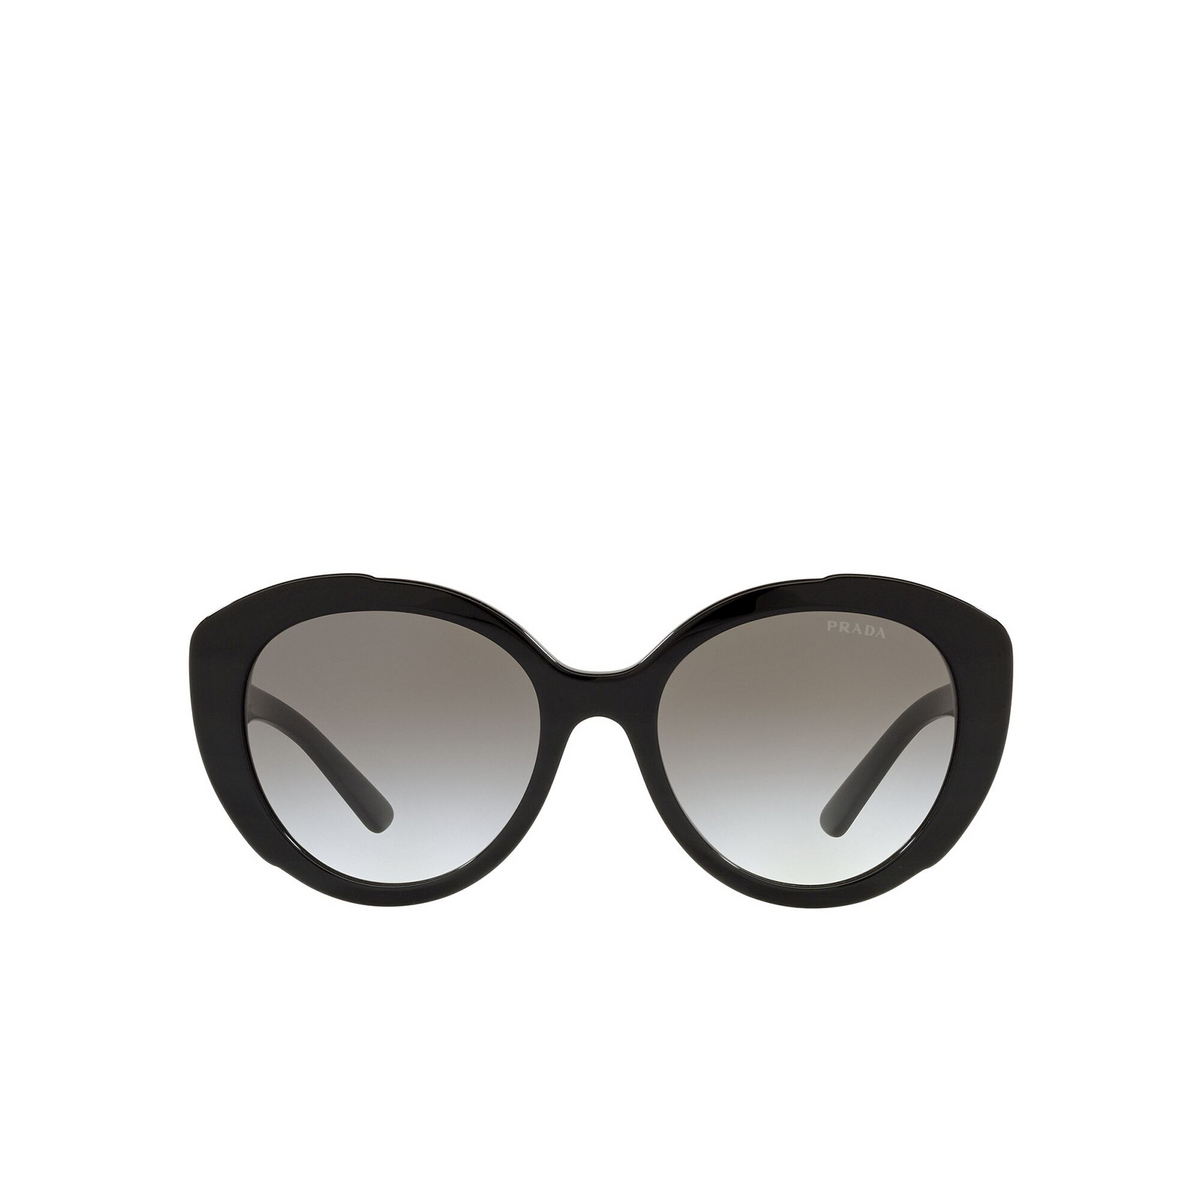 Prada® Butterfly Sunglasses: PR 01YS color Black 1AB0A7 - front view.